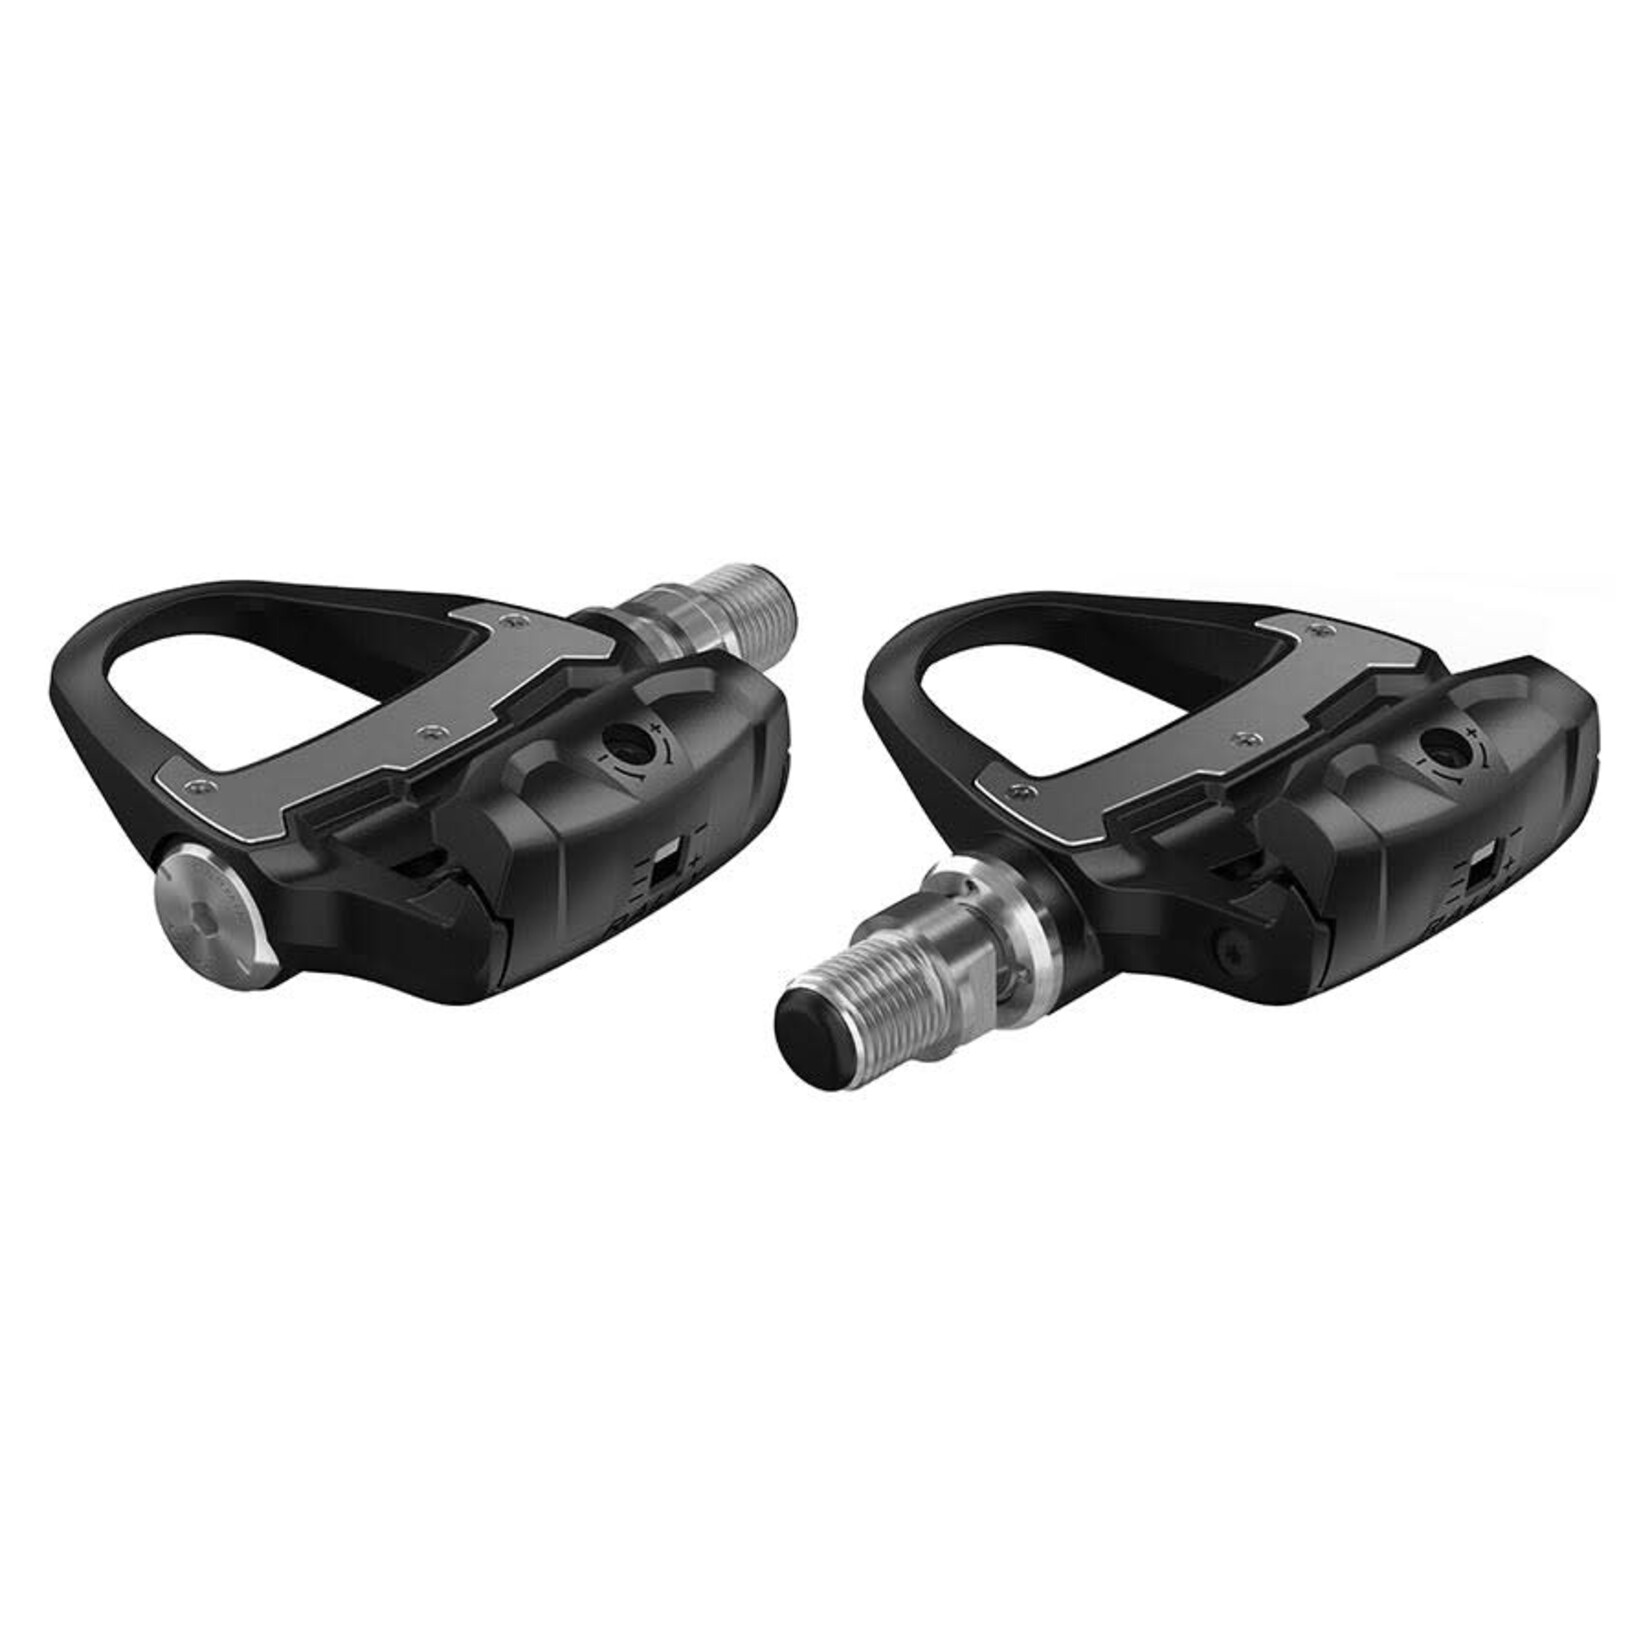 Garmin Rally RS100 Power Meter Pedals - Single Sided Clipless, Composite, 9/16", Black, Pair, Single-Sensing, Shimano SPD-SL